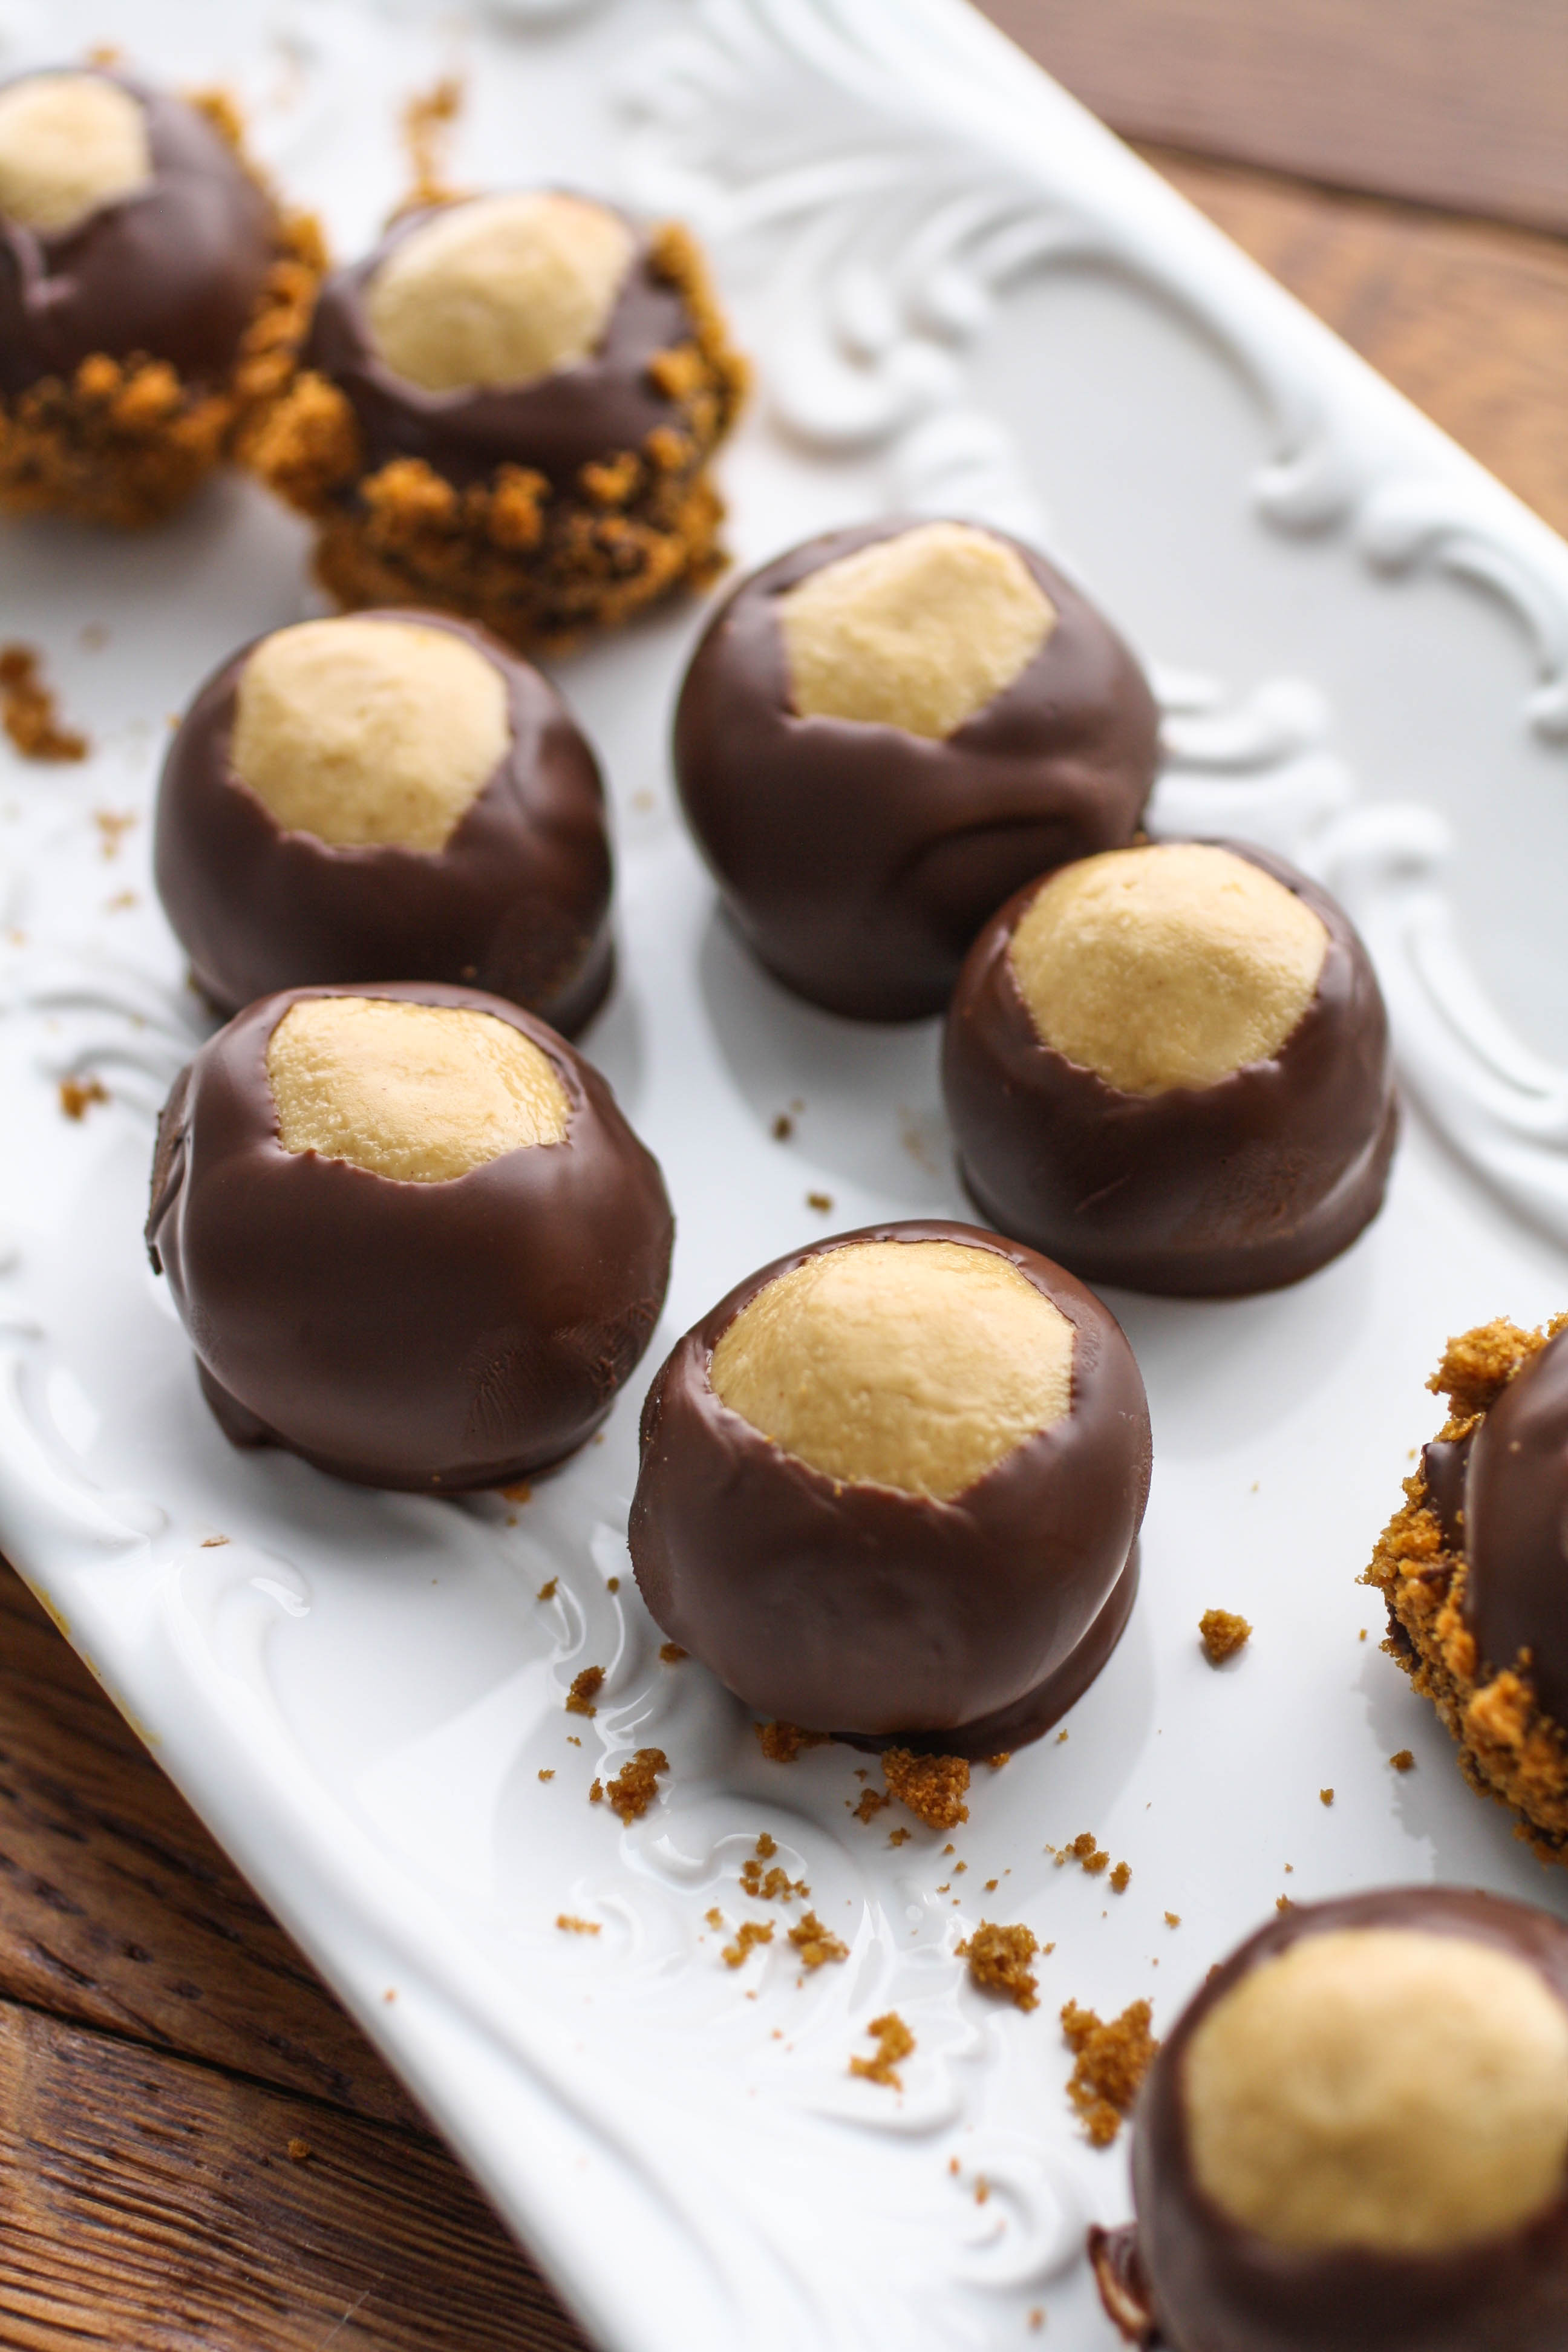 Peanut Butter Buckeyes Candy is a fun treat anytime of year. These homemade buckeyes candy are super tasty!